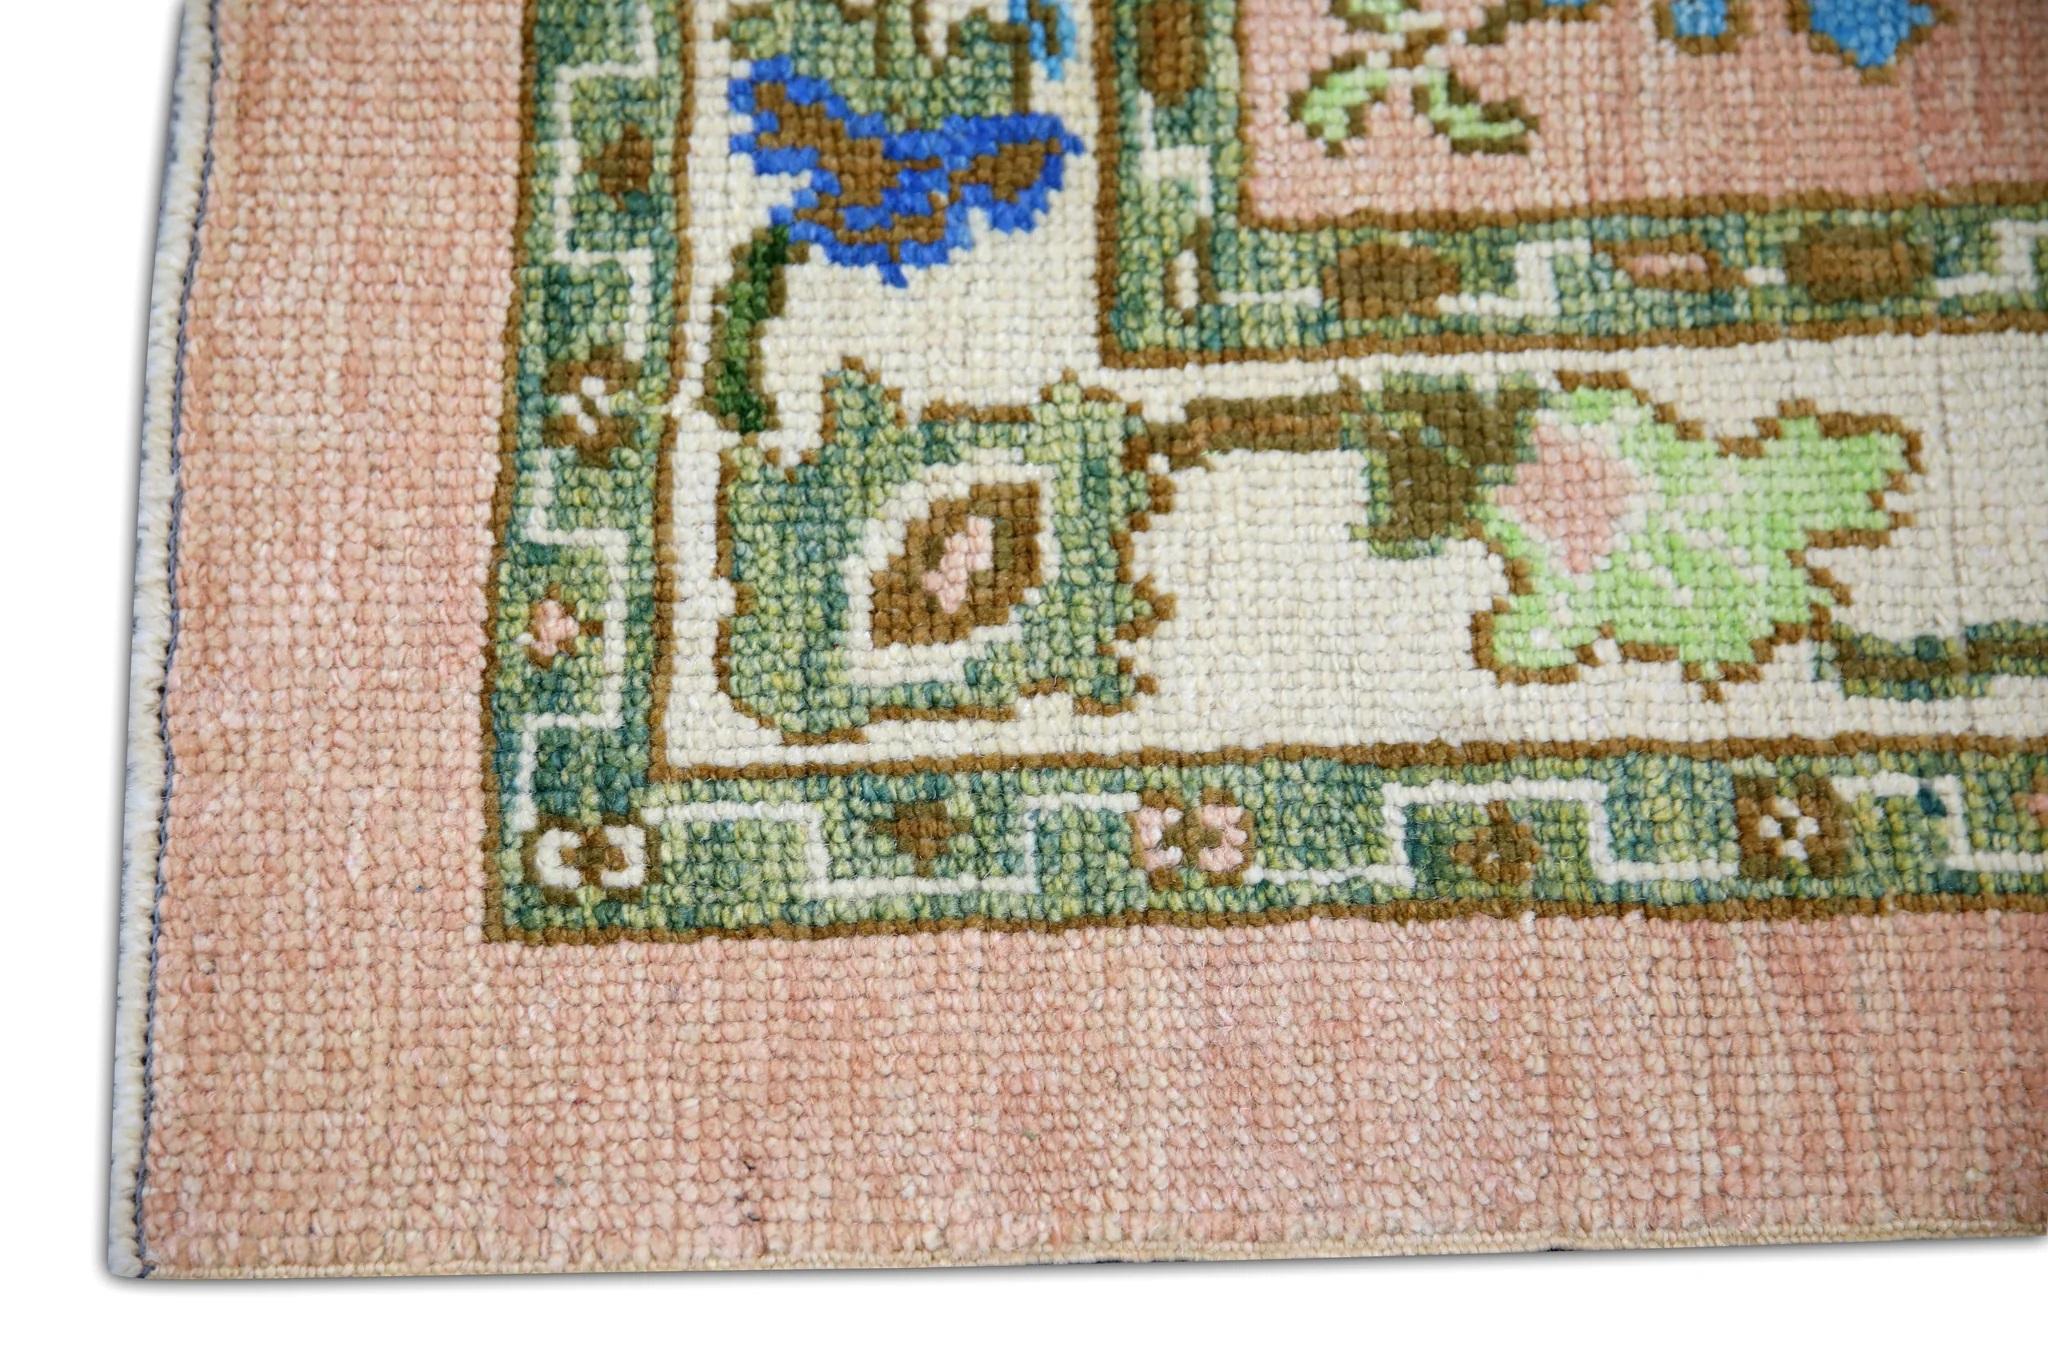 Vegetable Dyed Floral Handwoven Turkish Oushak Rug in Coral, Green, Brown, and Blue 3' x 5'1